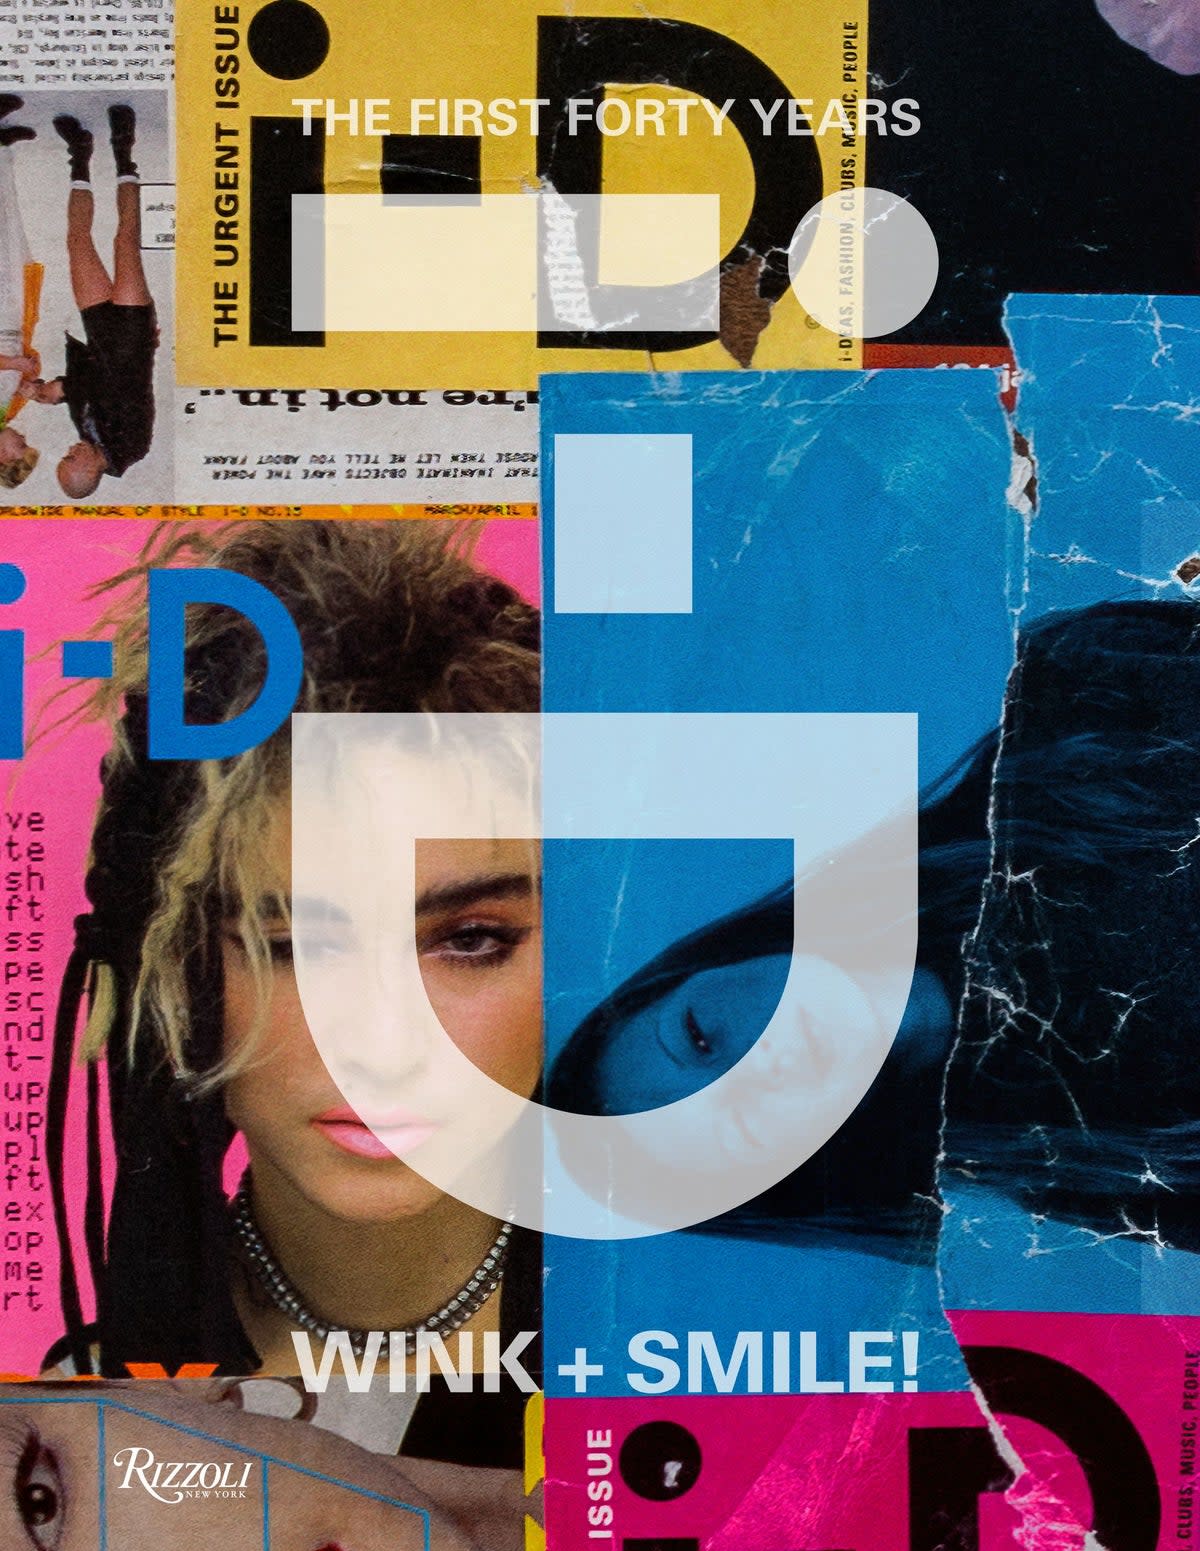 i-D: WINK AND SMILE!: THE FIRST FORTY YEARS (i-D Magazine)